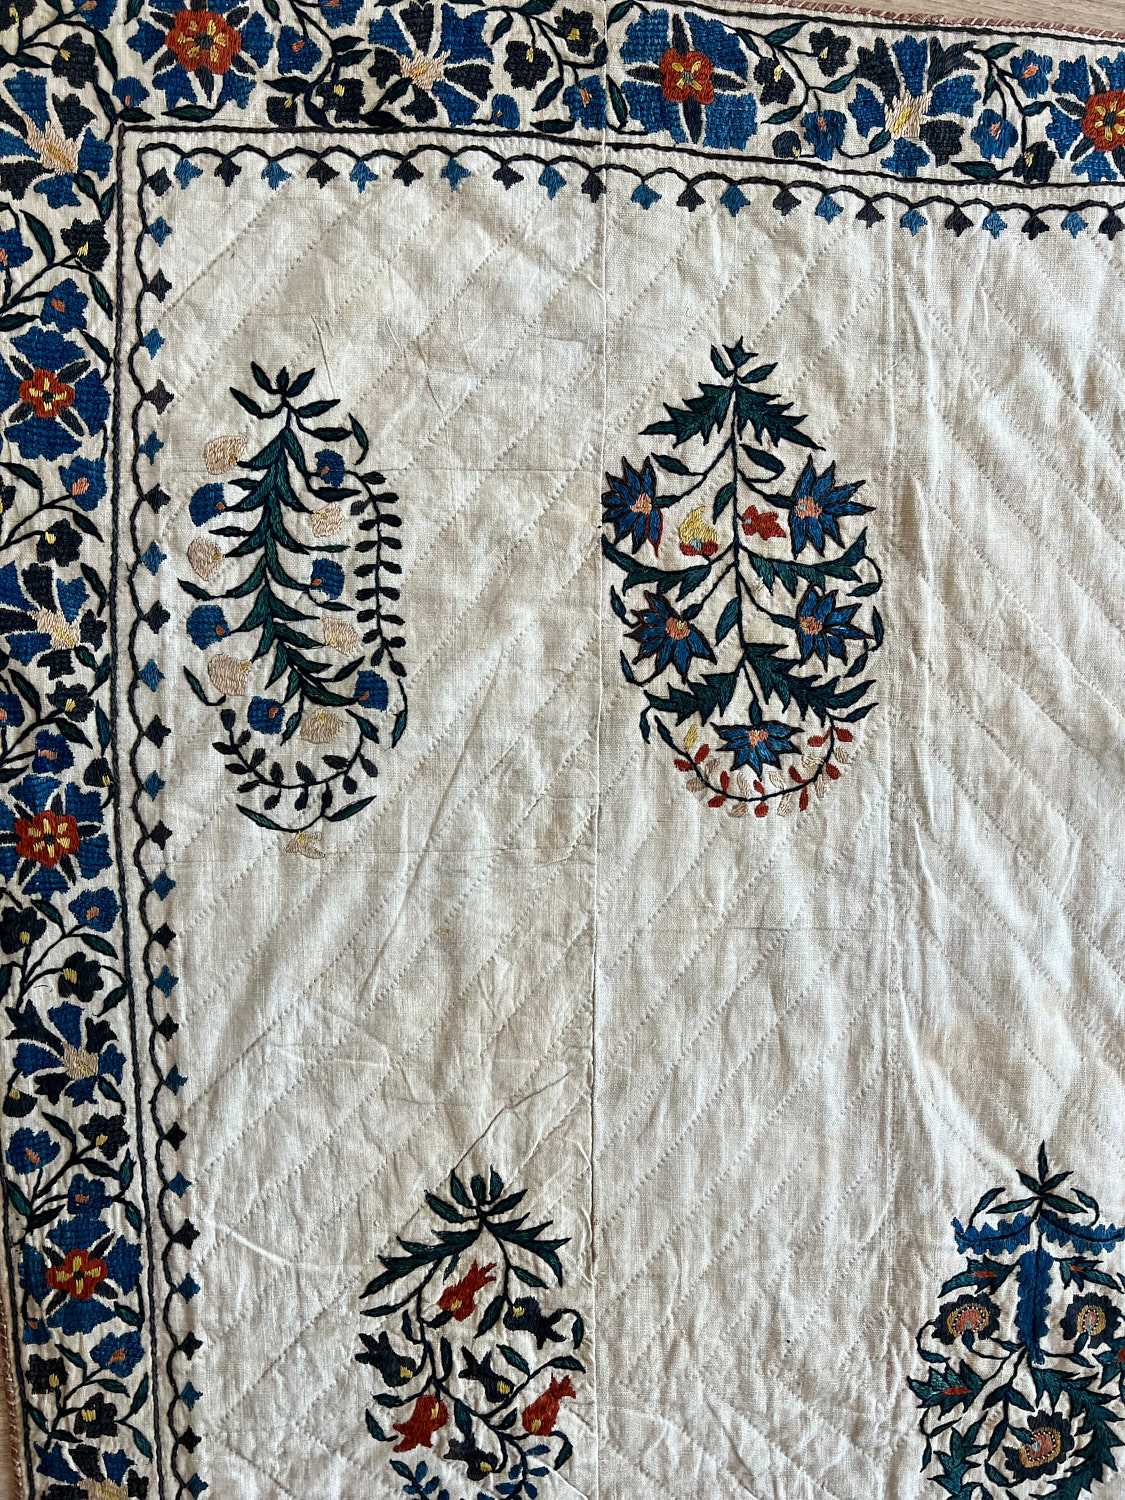 A MID 20TH CENTURY SUZANI BED SPREAD / WALL HANGING - Image 2 of 6